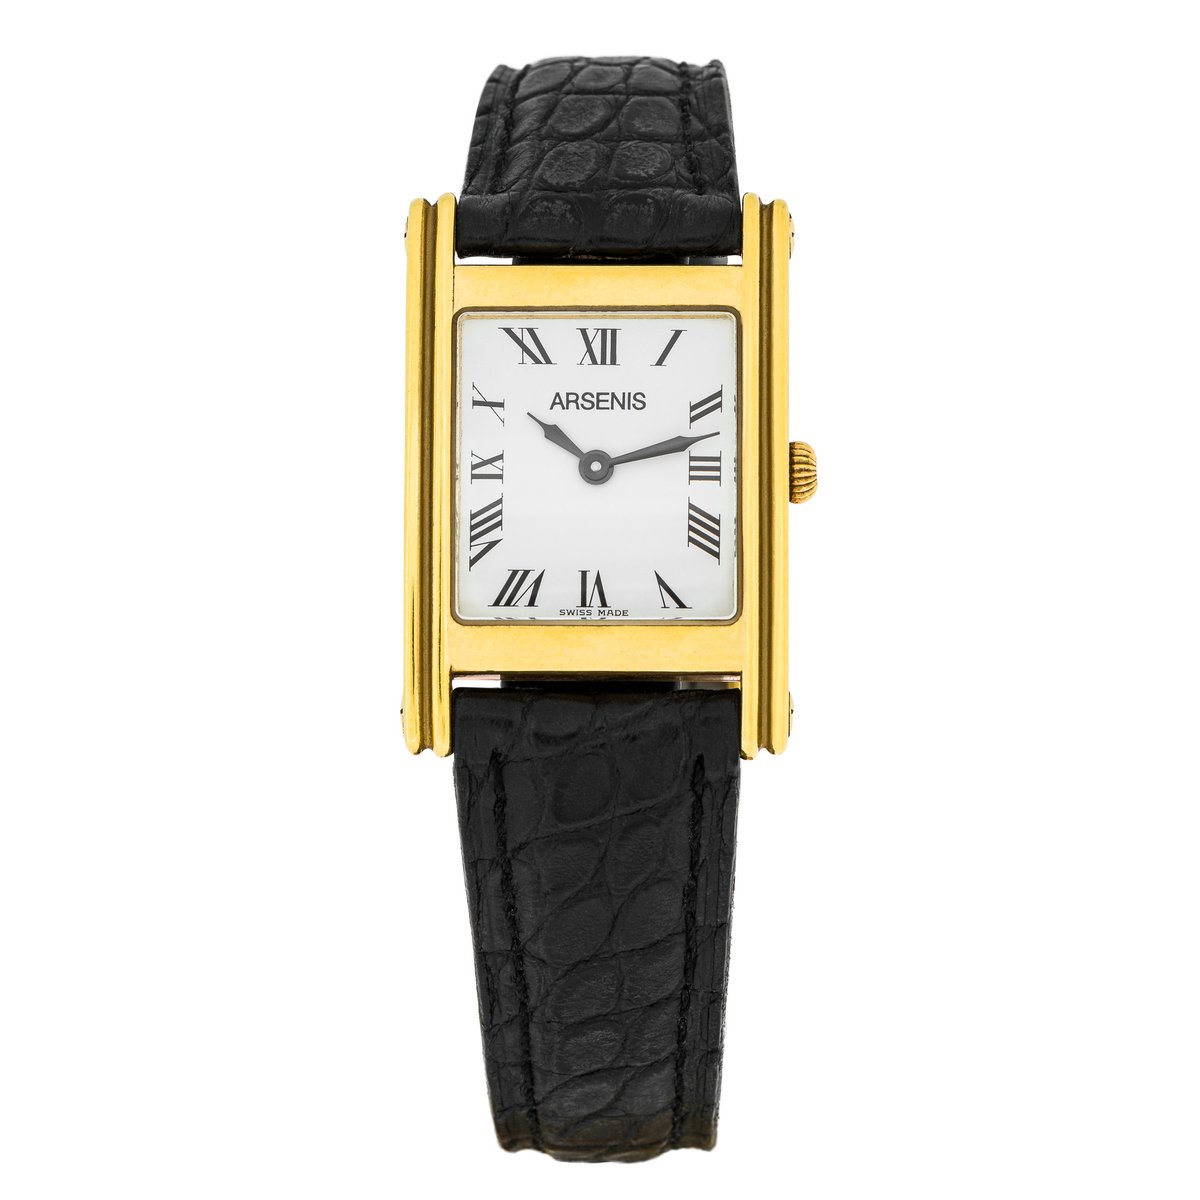 arsenis.gr/index.php?rout… Distinctive elegance. The Arsenis Yellow Gold Collection recapture the original essence of his manufacture: the fusion of gold and leather in a chic aesthetic, with bold geometric lines complimenting precious metals.

#orthogon #swissmade #arseniswatch